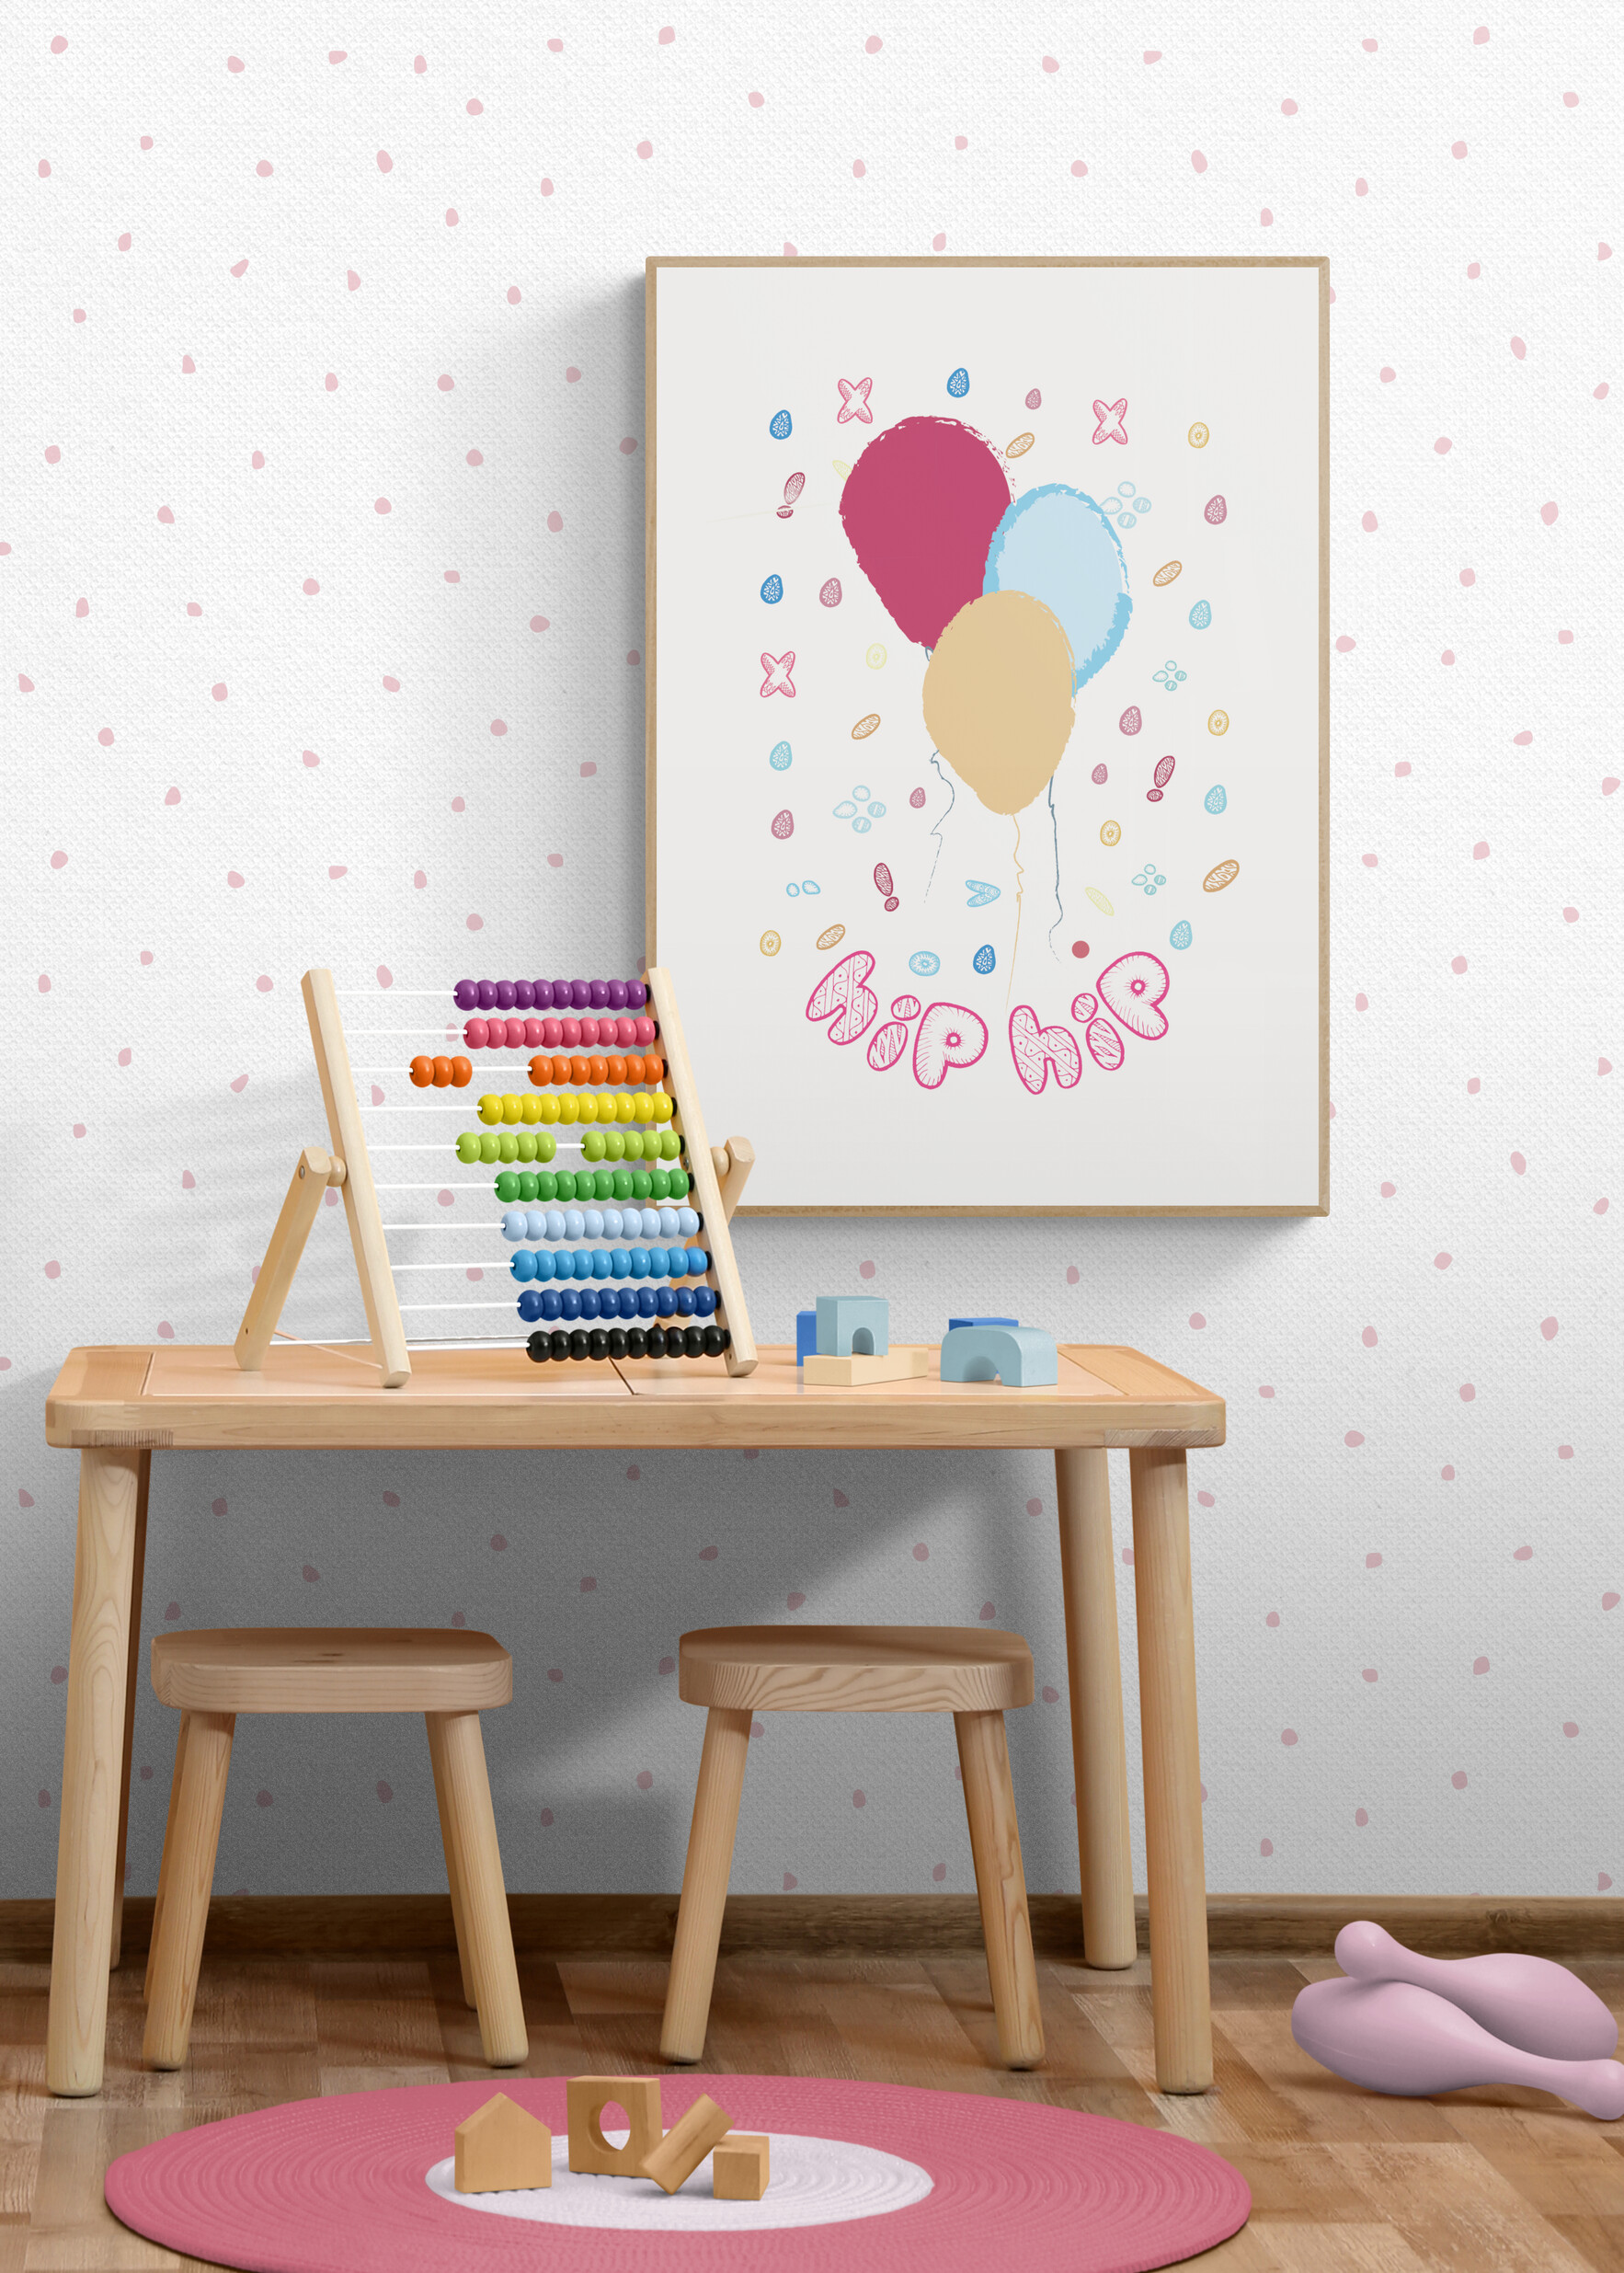 Kid's room wall art: "Hip Hop" poster from the Summer Collection for kids. This fun poster showcases colorful balloons in a playroom setting.